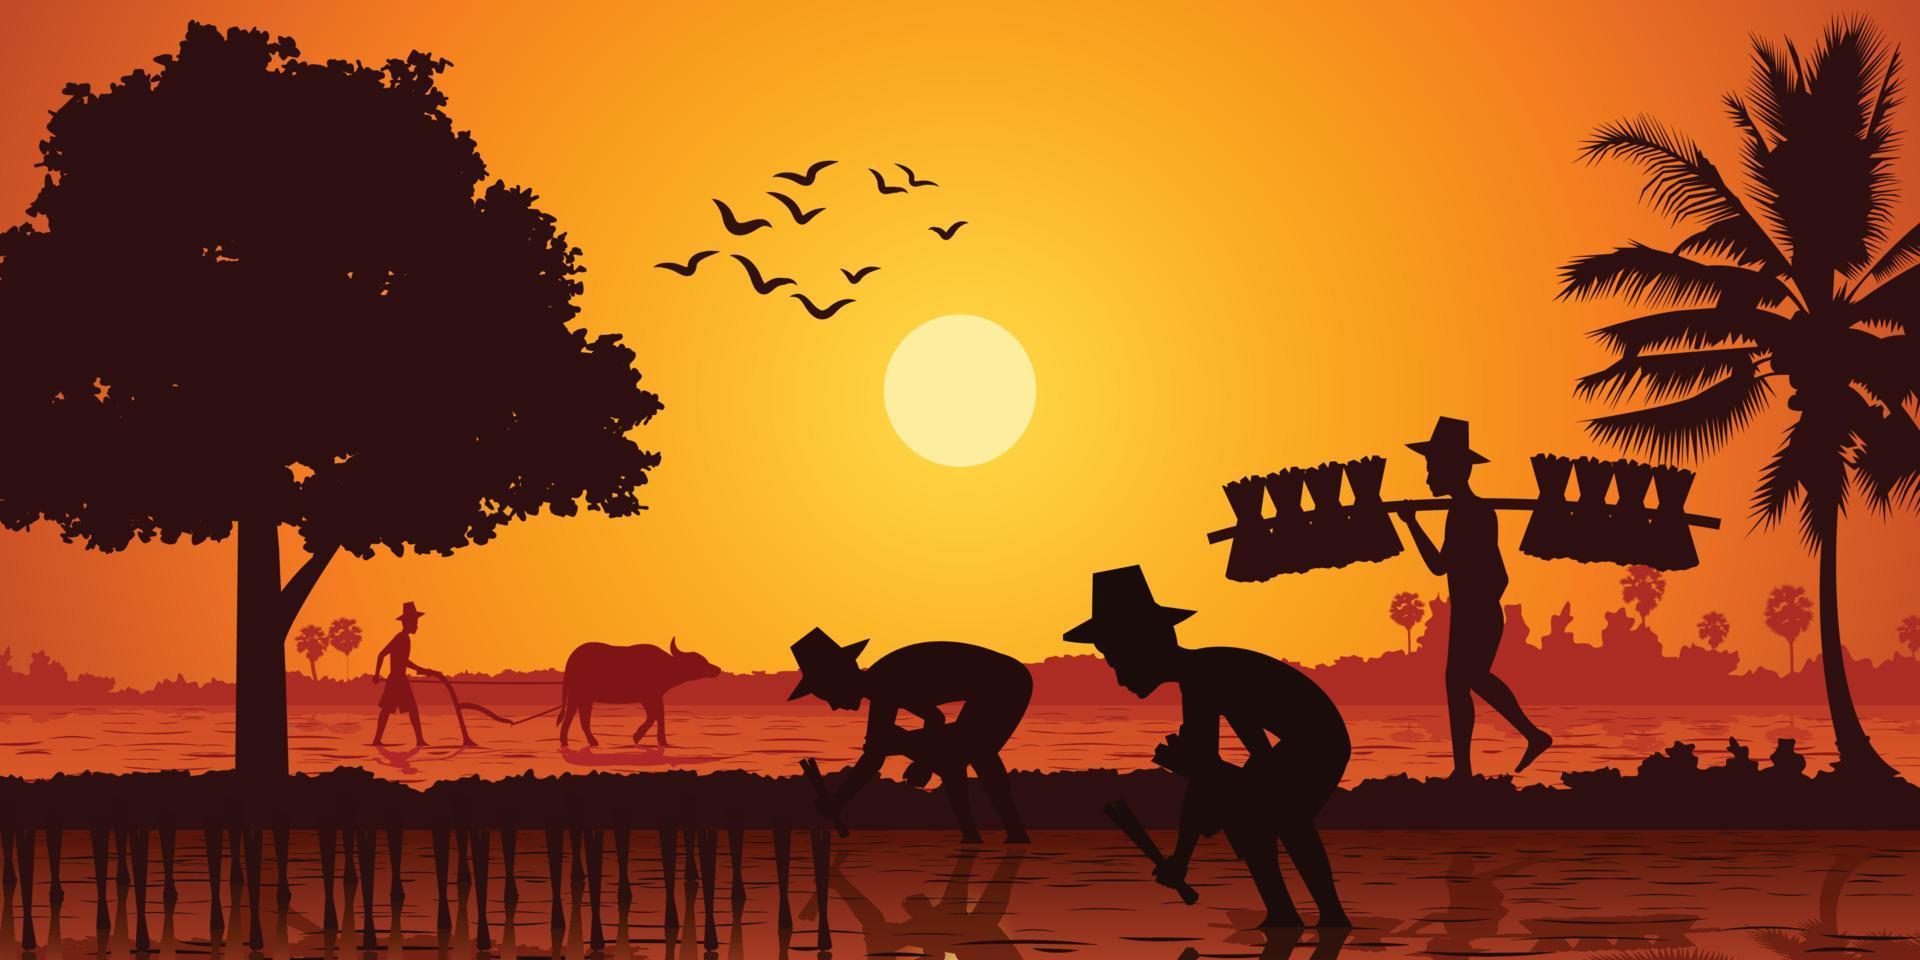 country life of Asia farmer plant rice while a man carry rice seedling and another plow field by buffalo on sunrise time,silhouette style vector